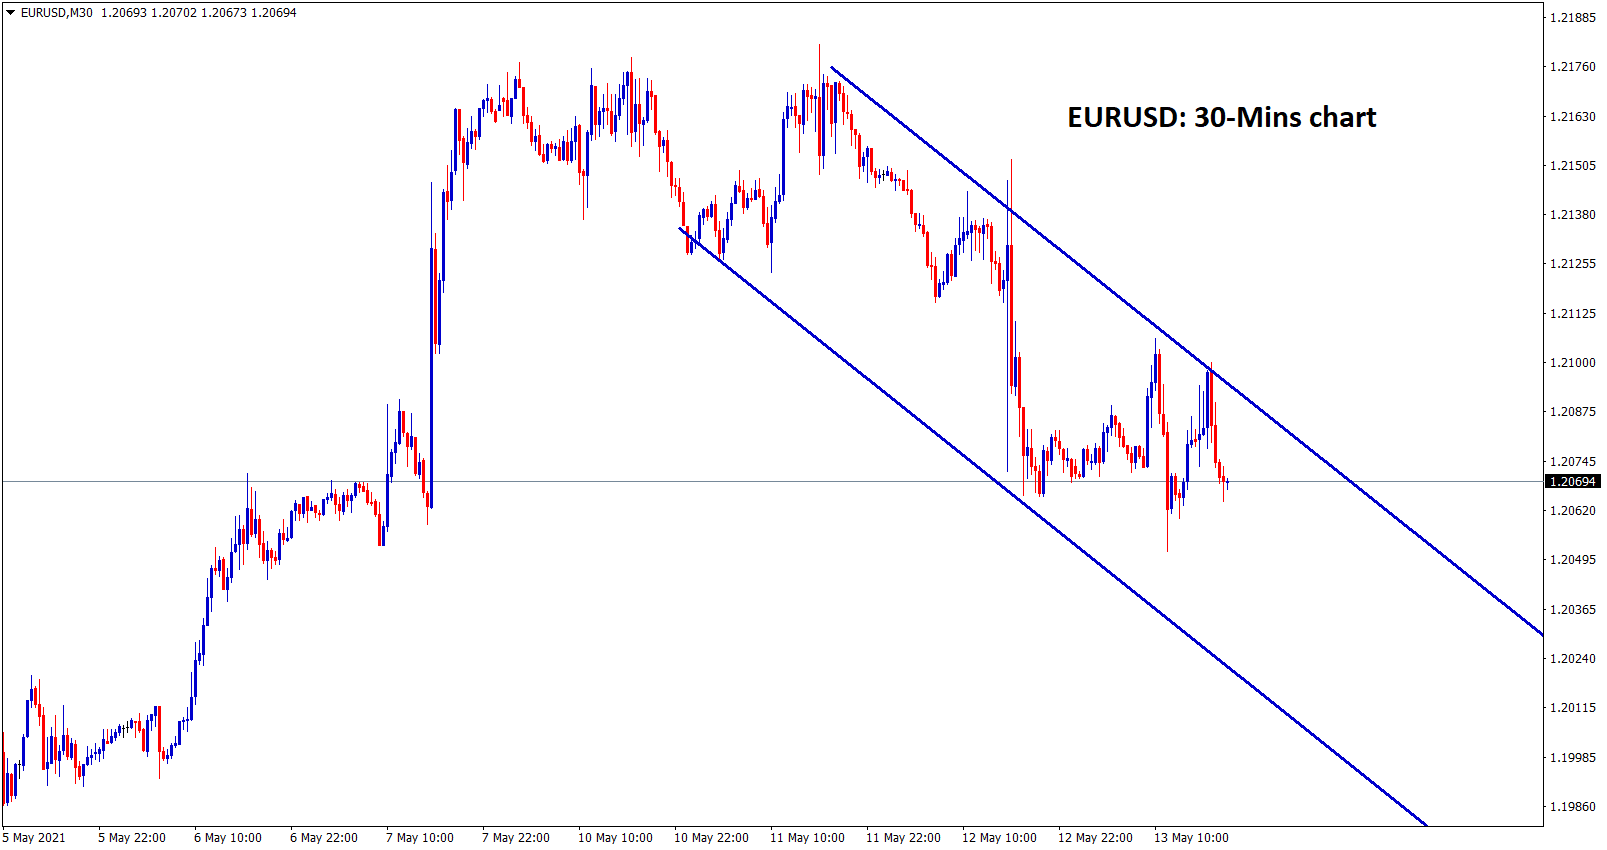 EURUSD moving in a descending channel in 30 minutes chart